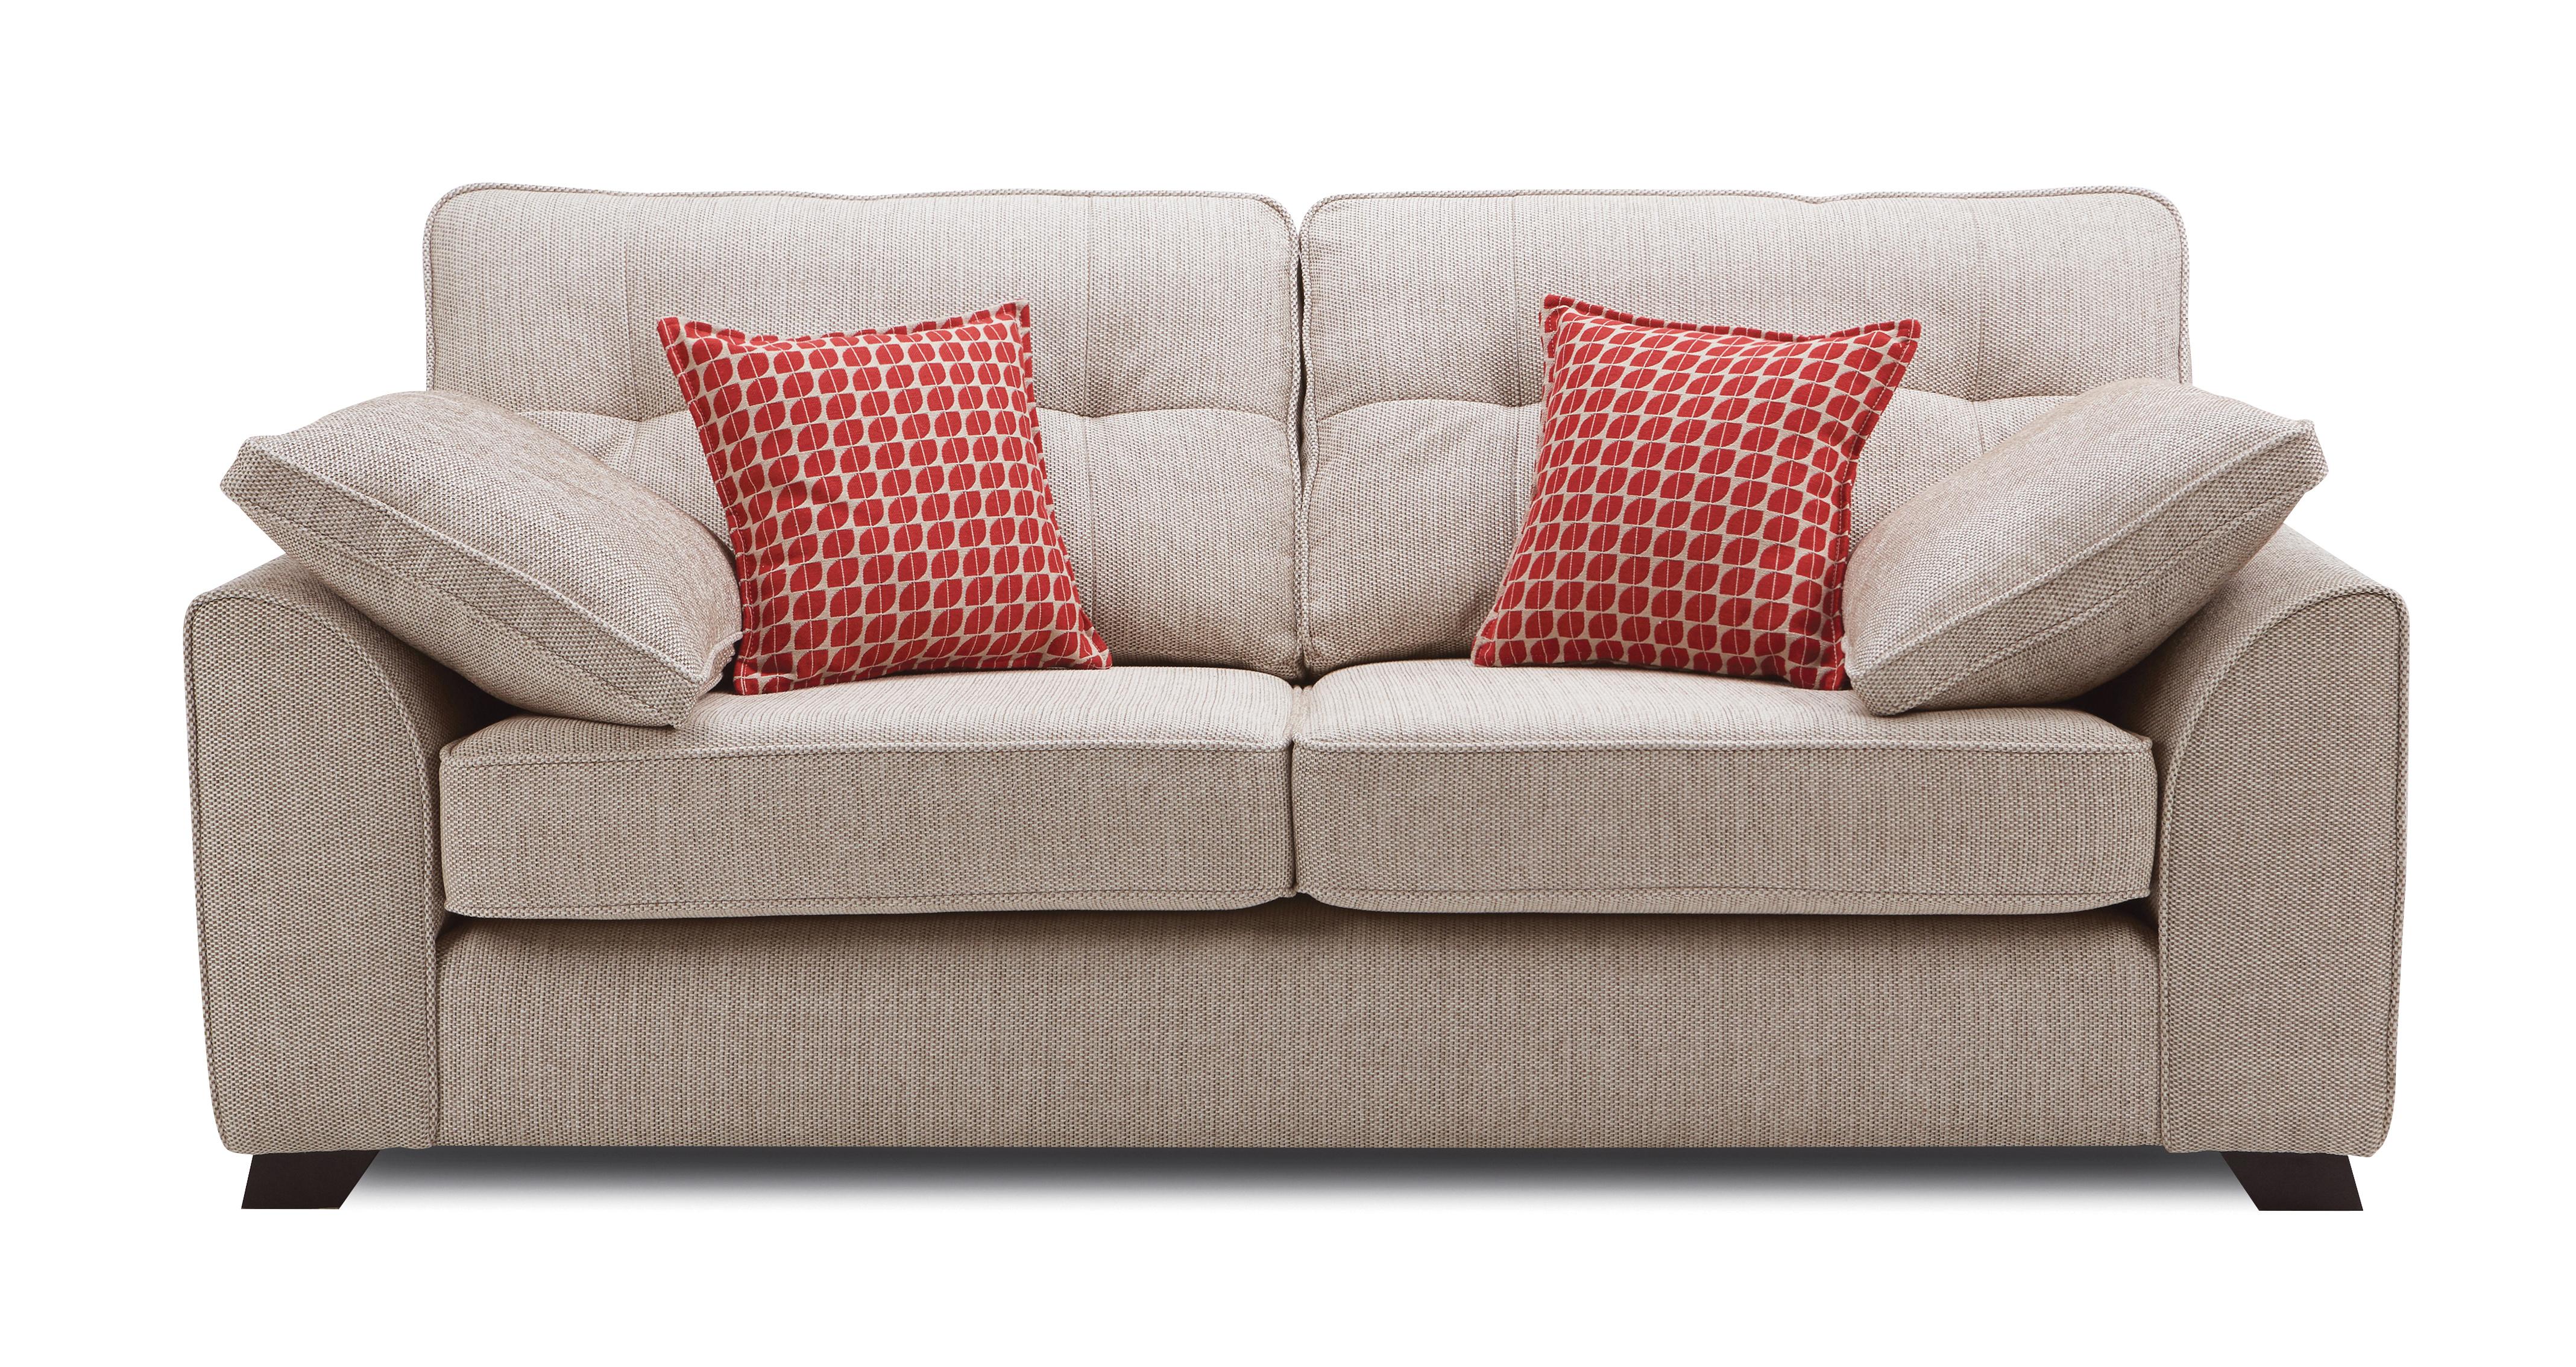 sofa bed clearance sales